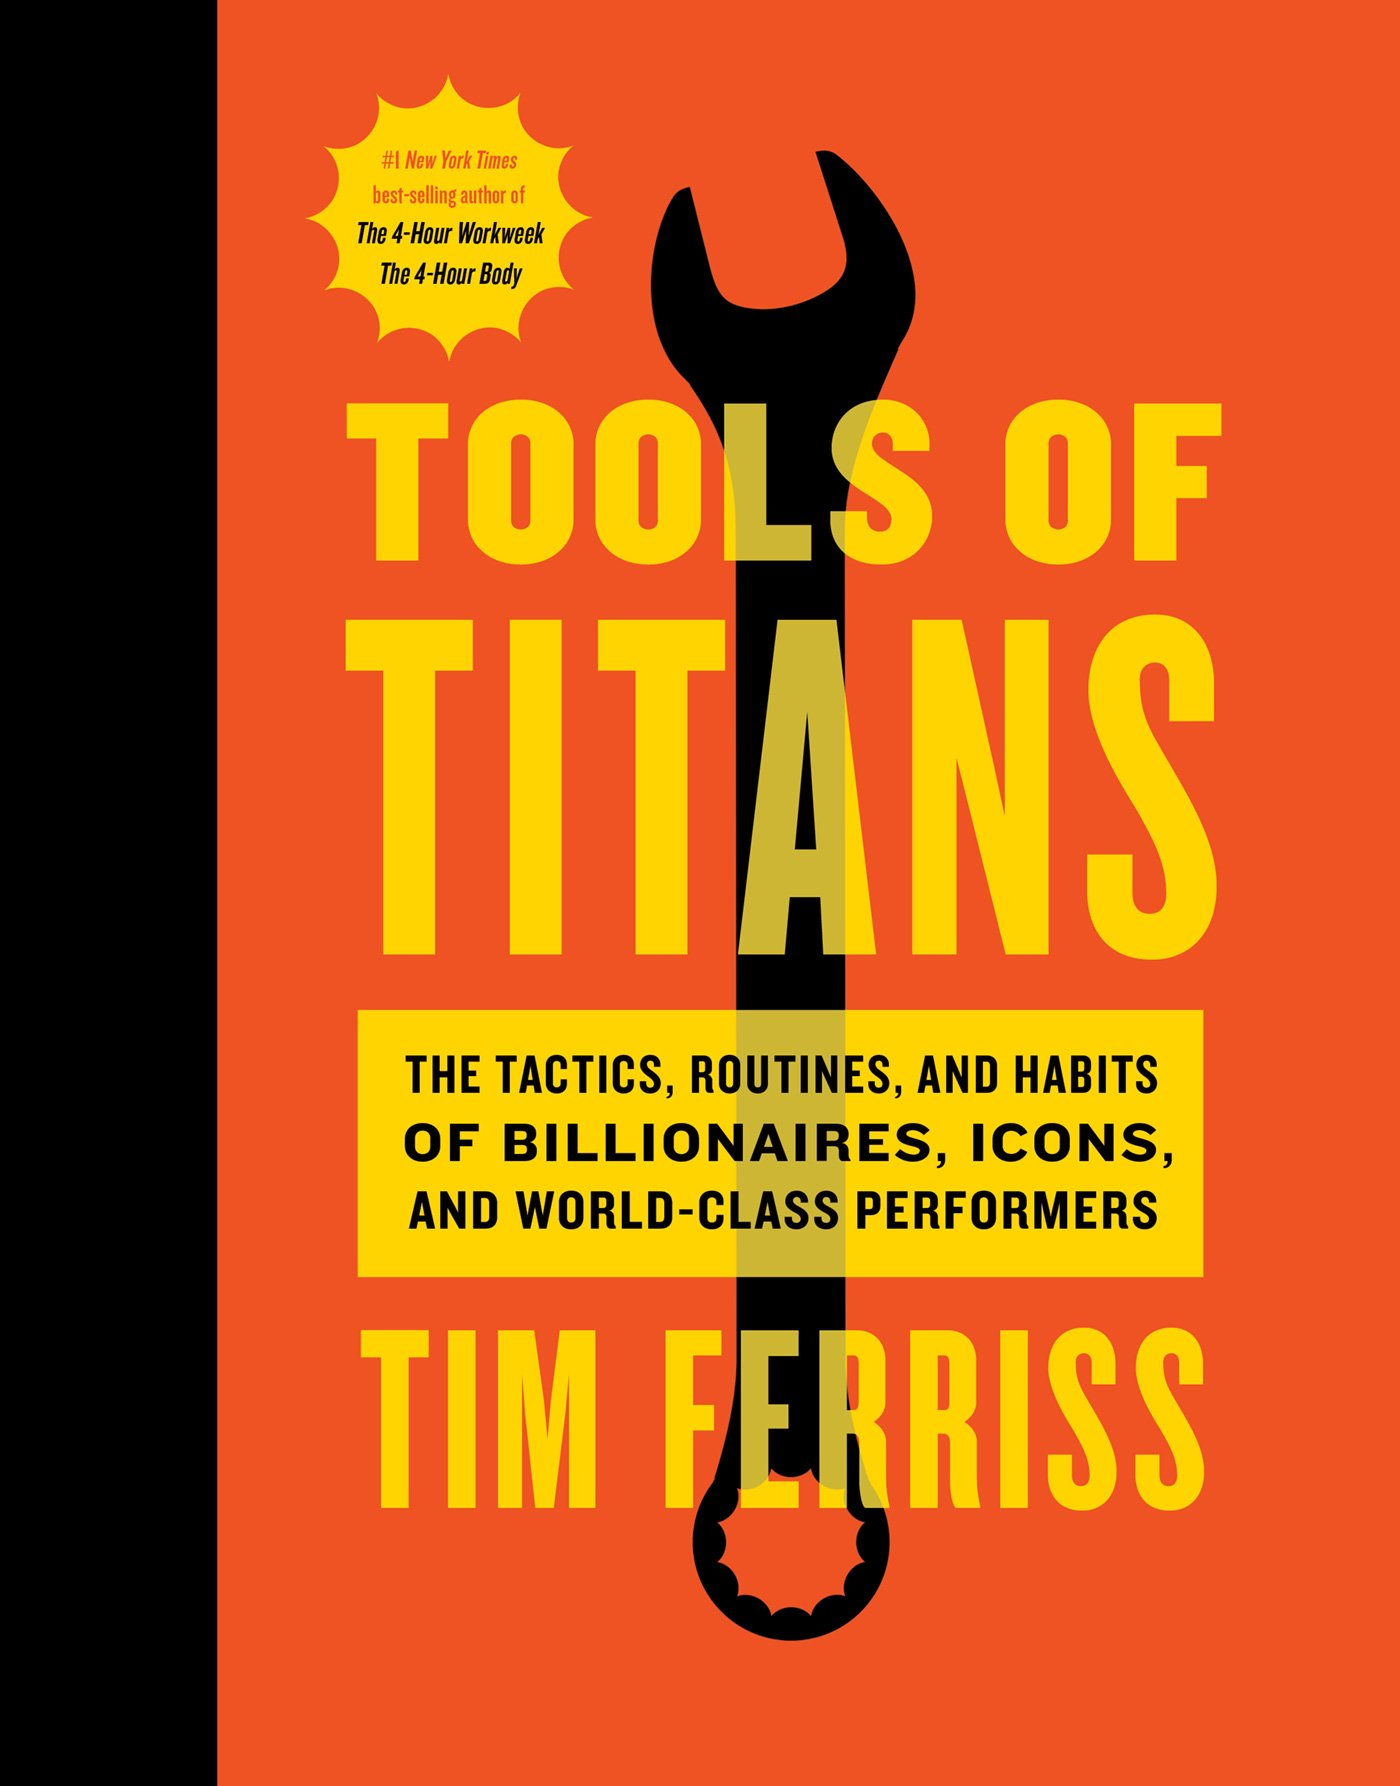 Tools of Titans by Tim Ferriss - Notes